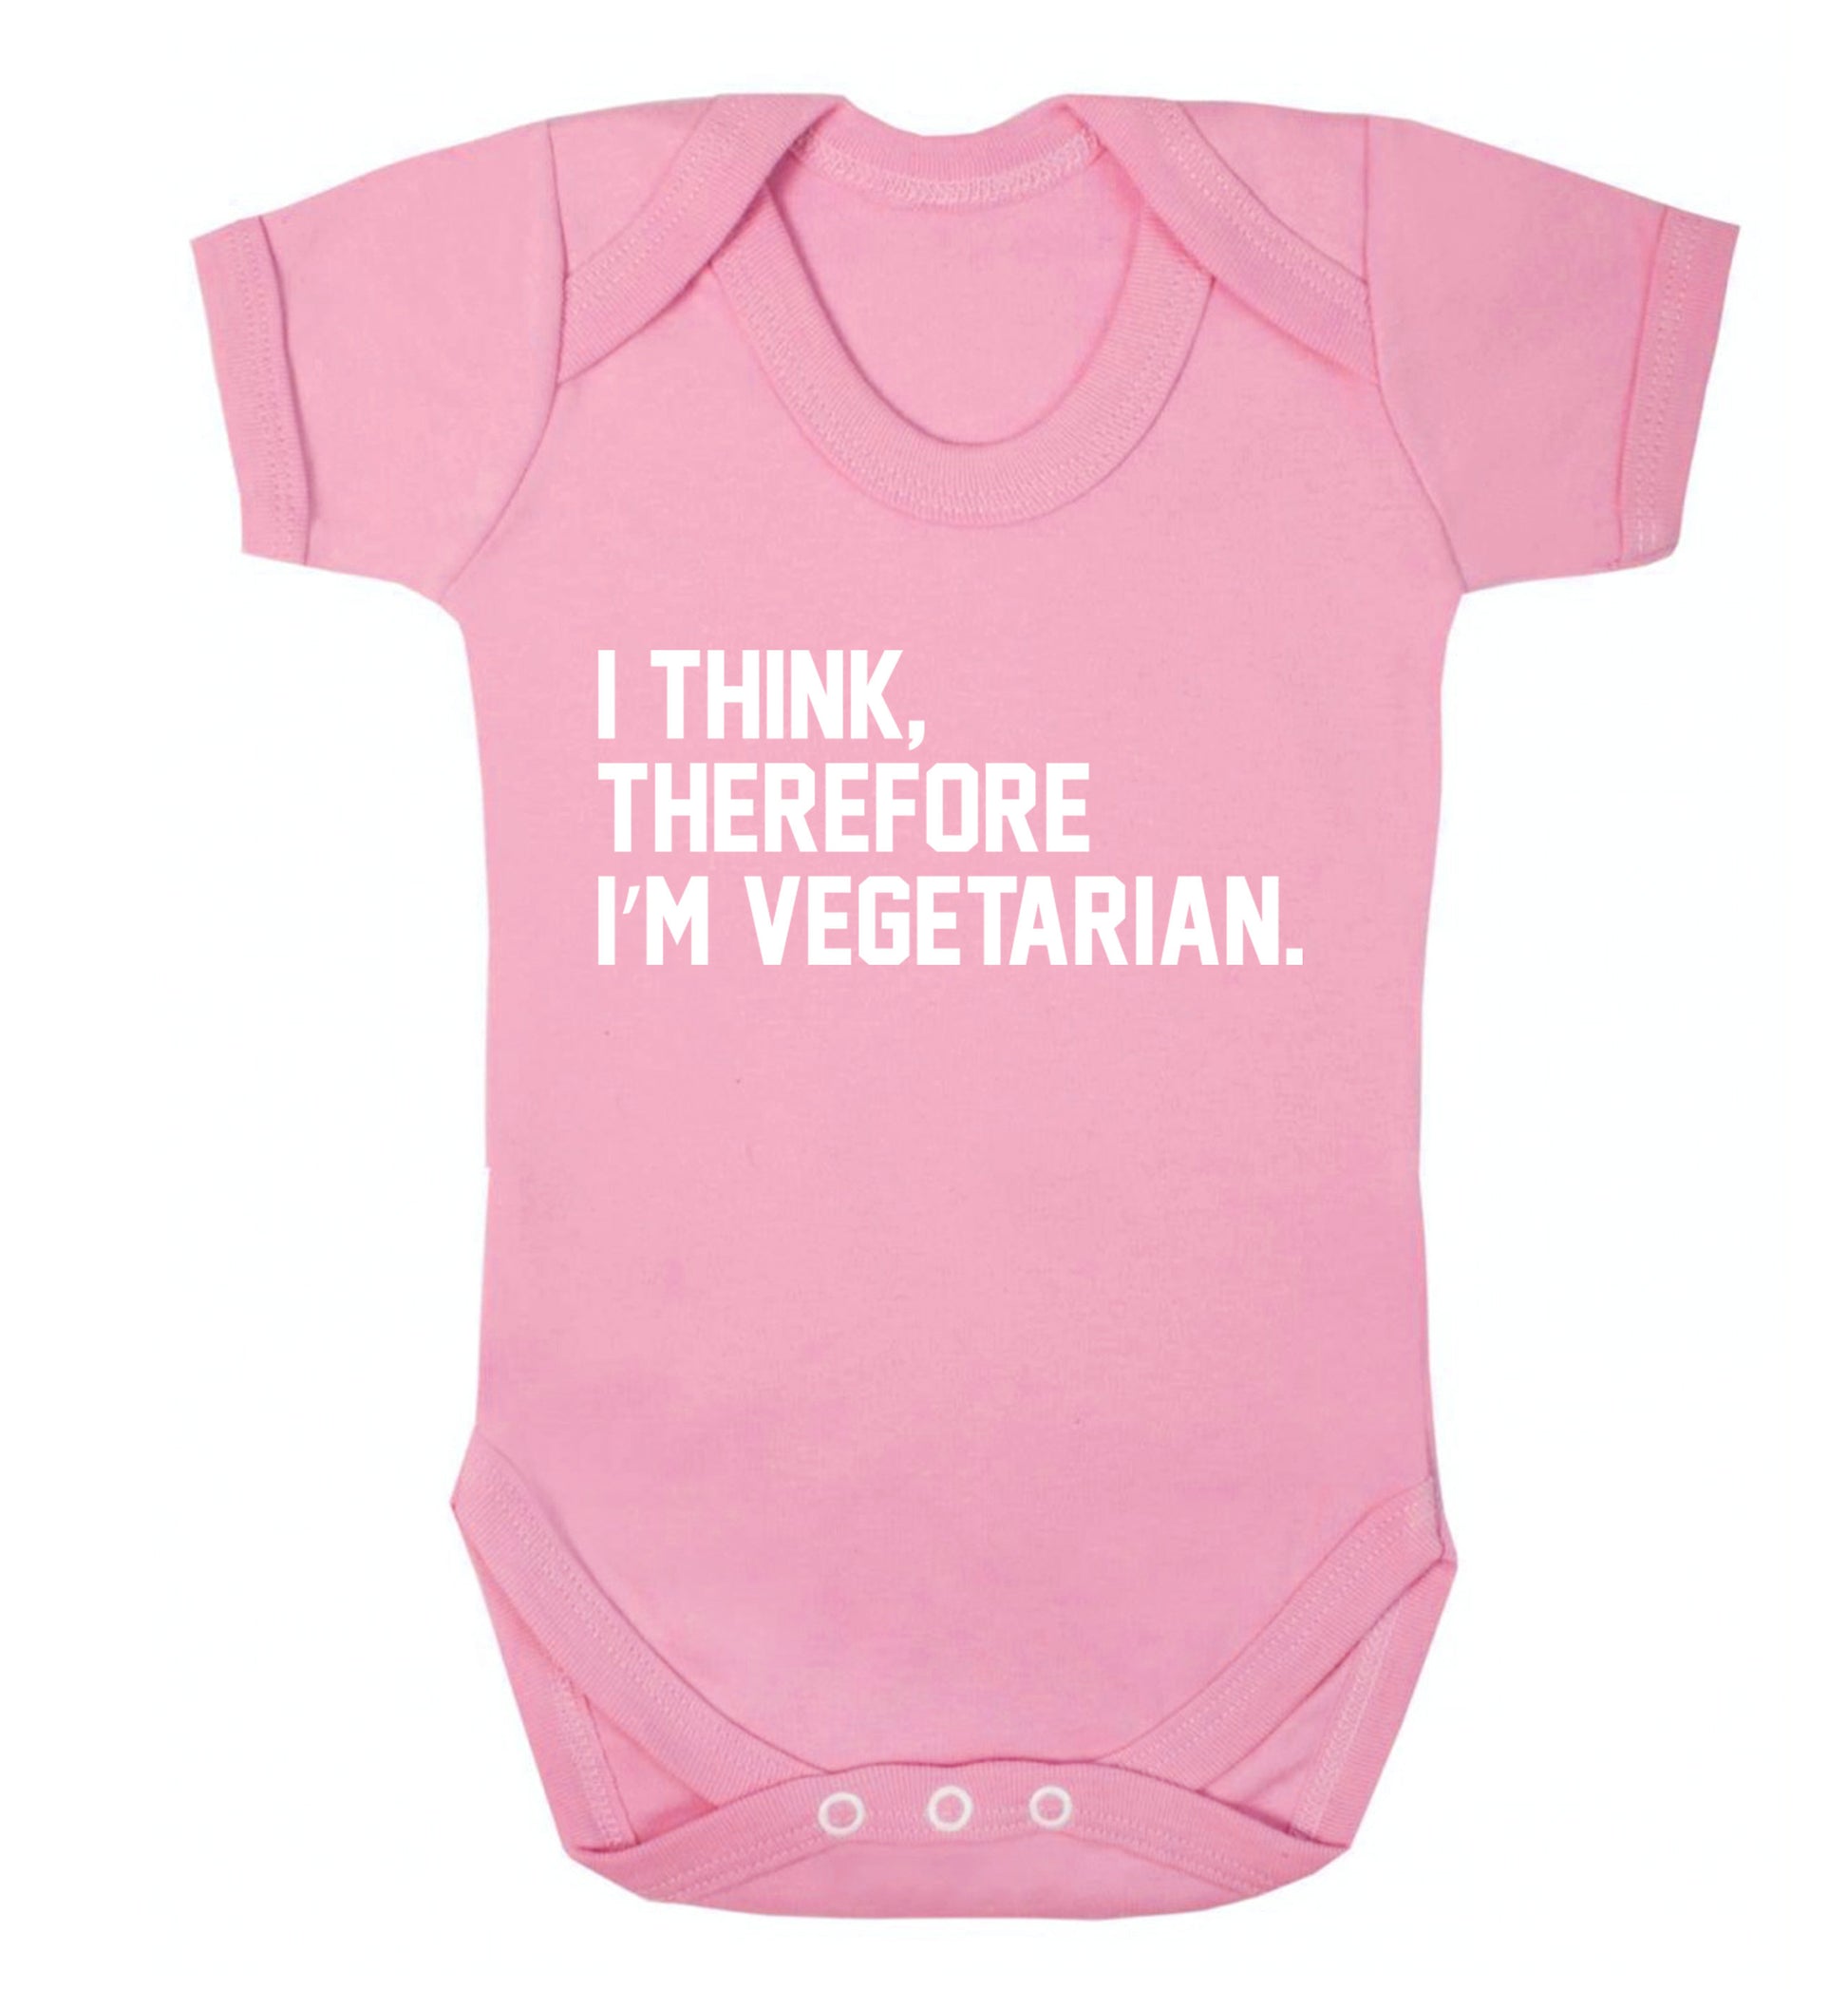 I think therefore I'm vegetarian Baby Vest pale pink 18-24 months